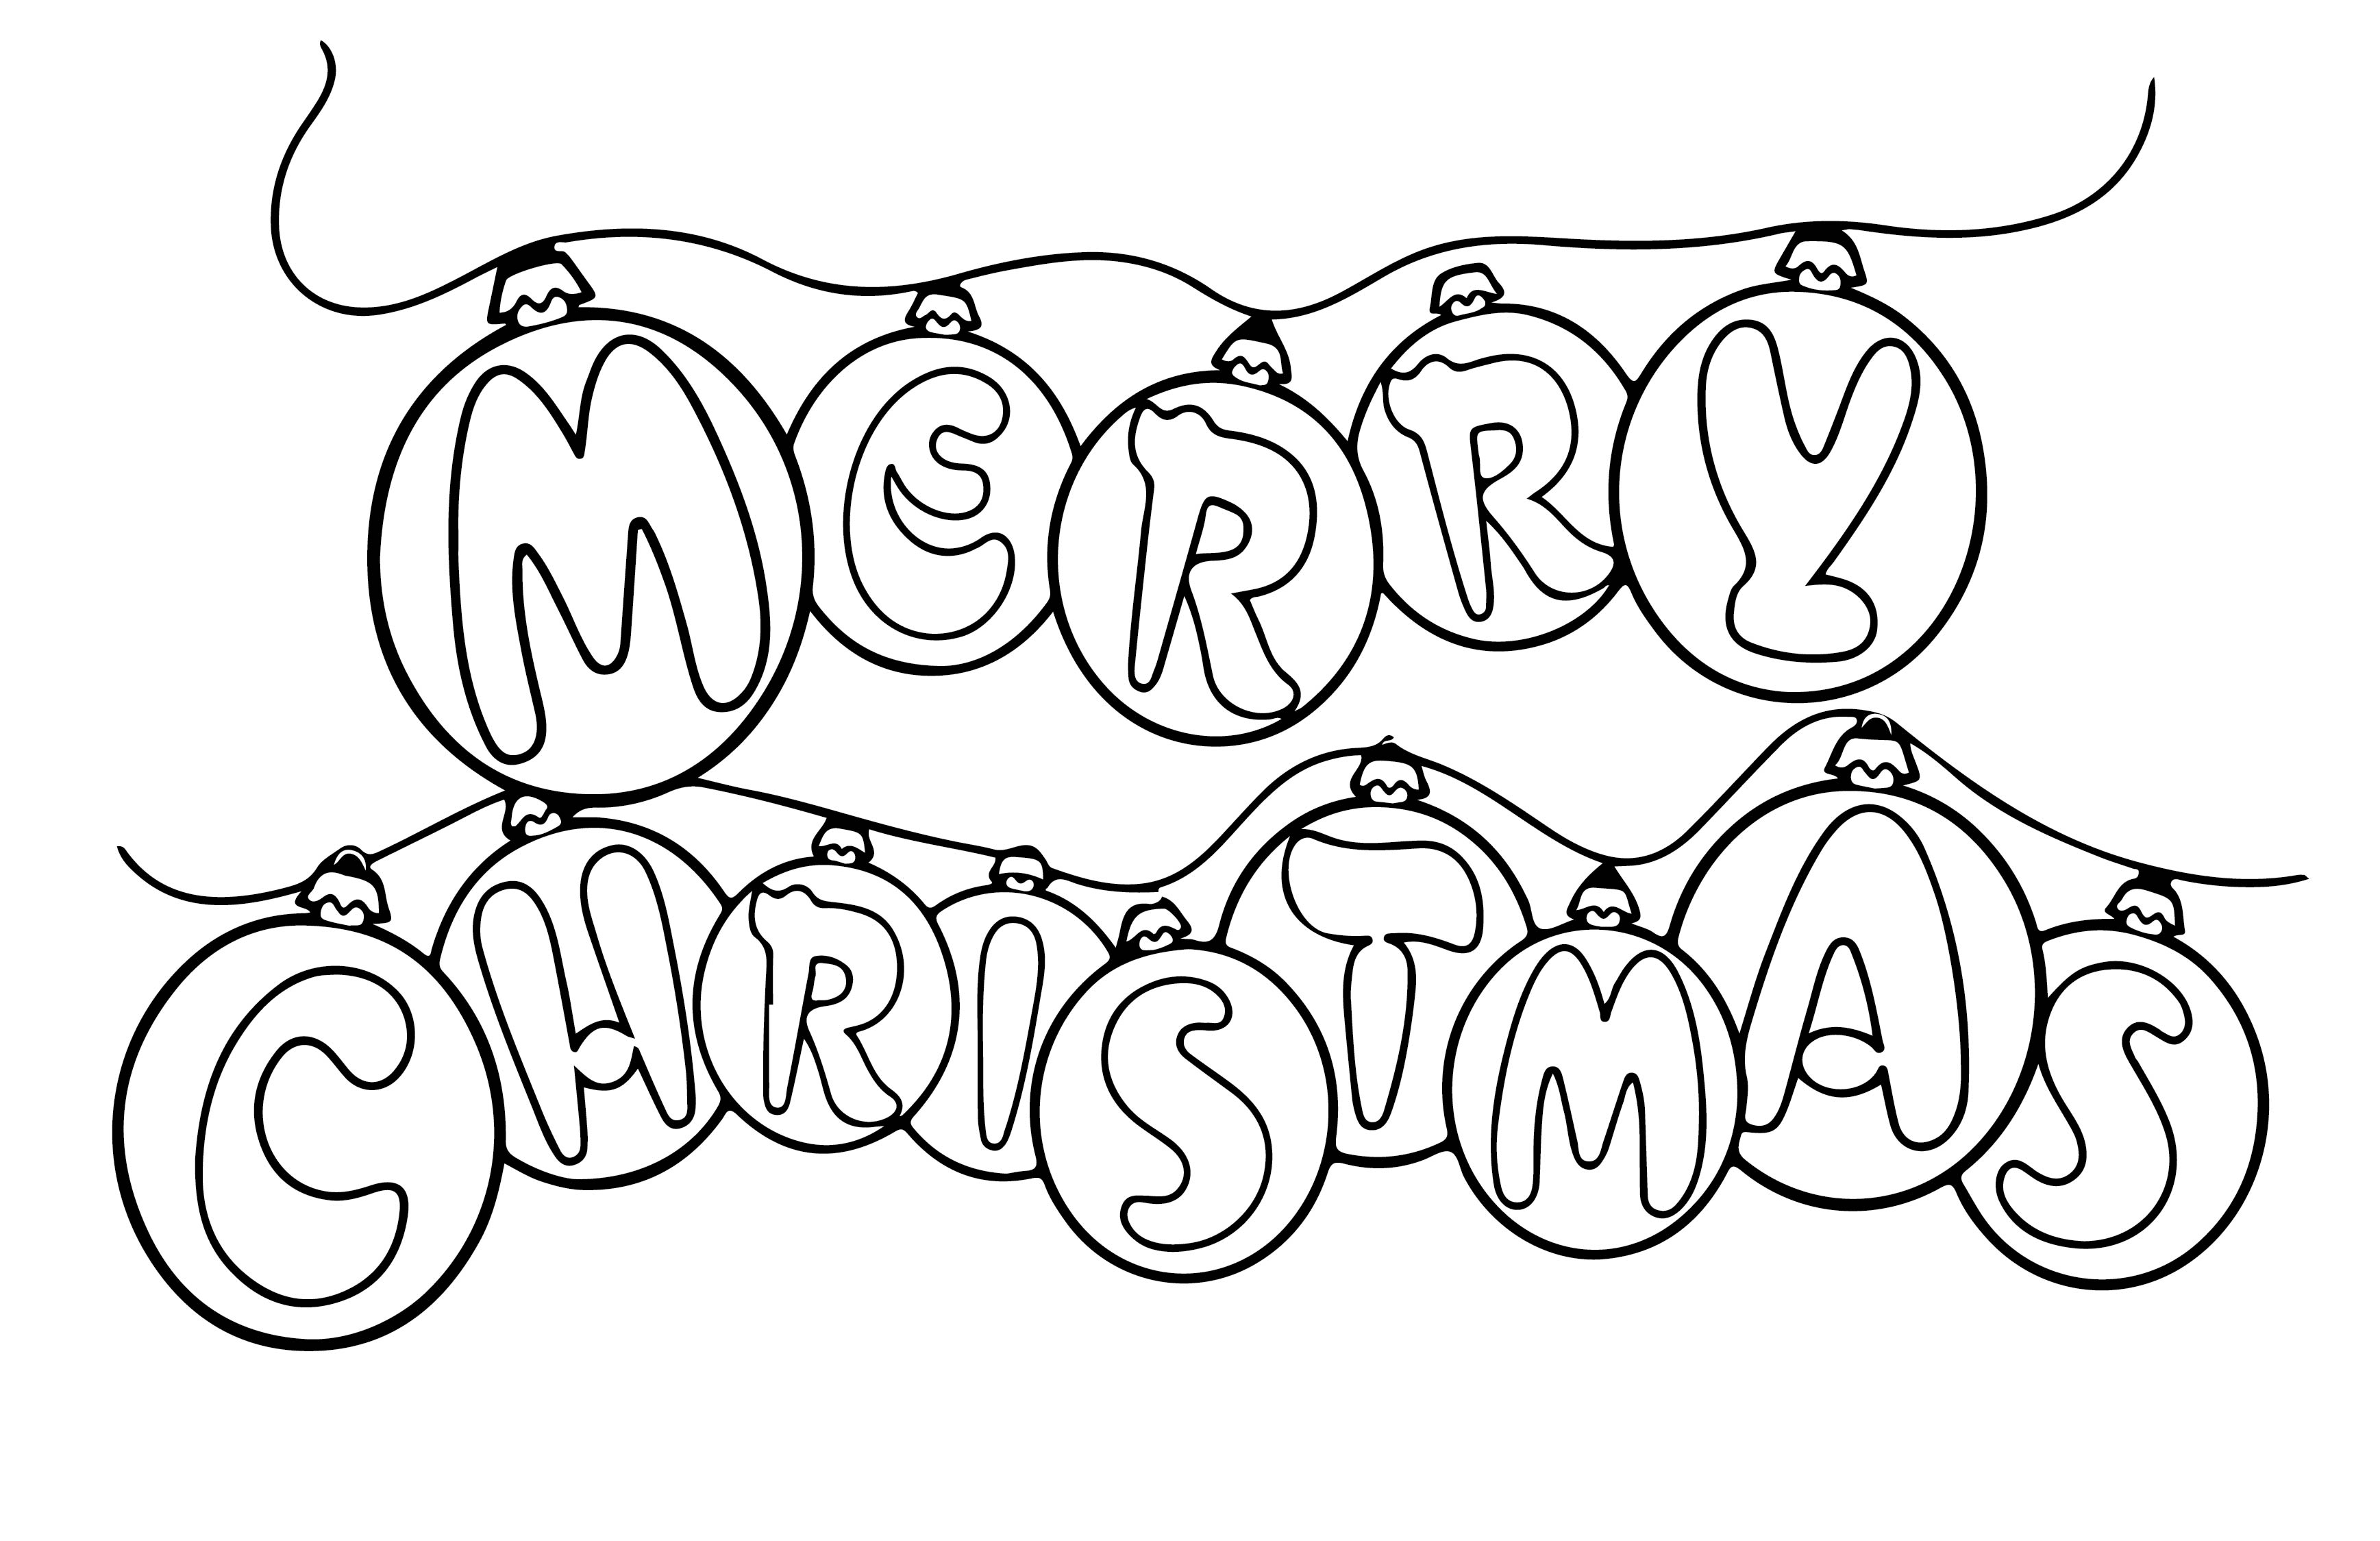 free-christmas-colouring-pages-for-children-kids-online-world-blog